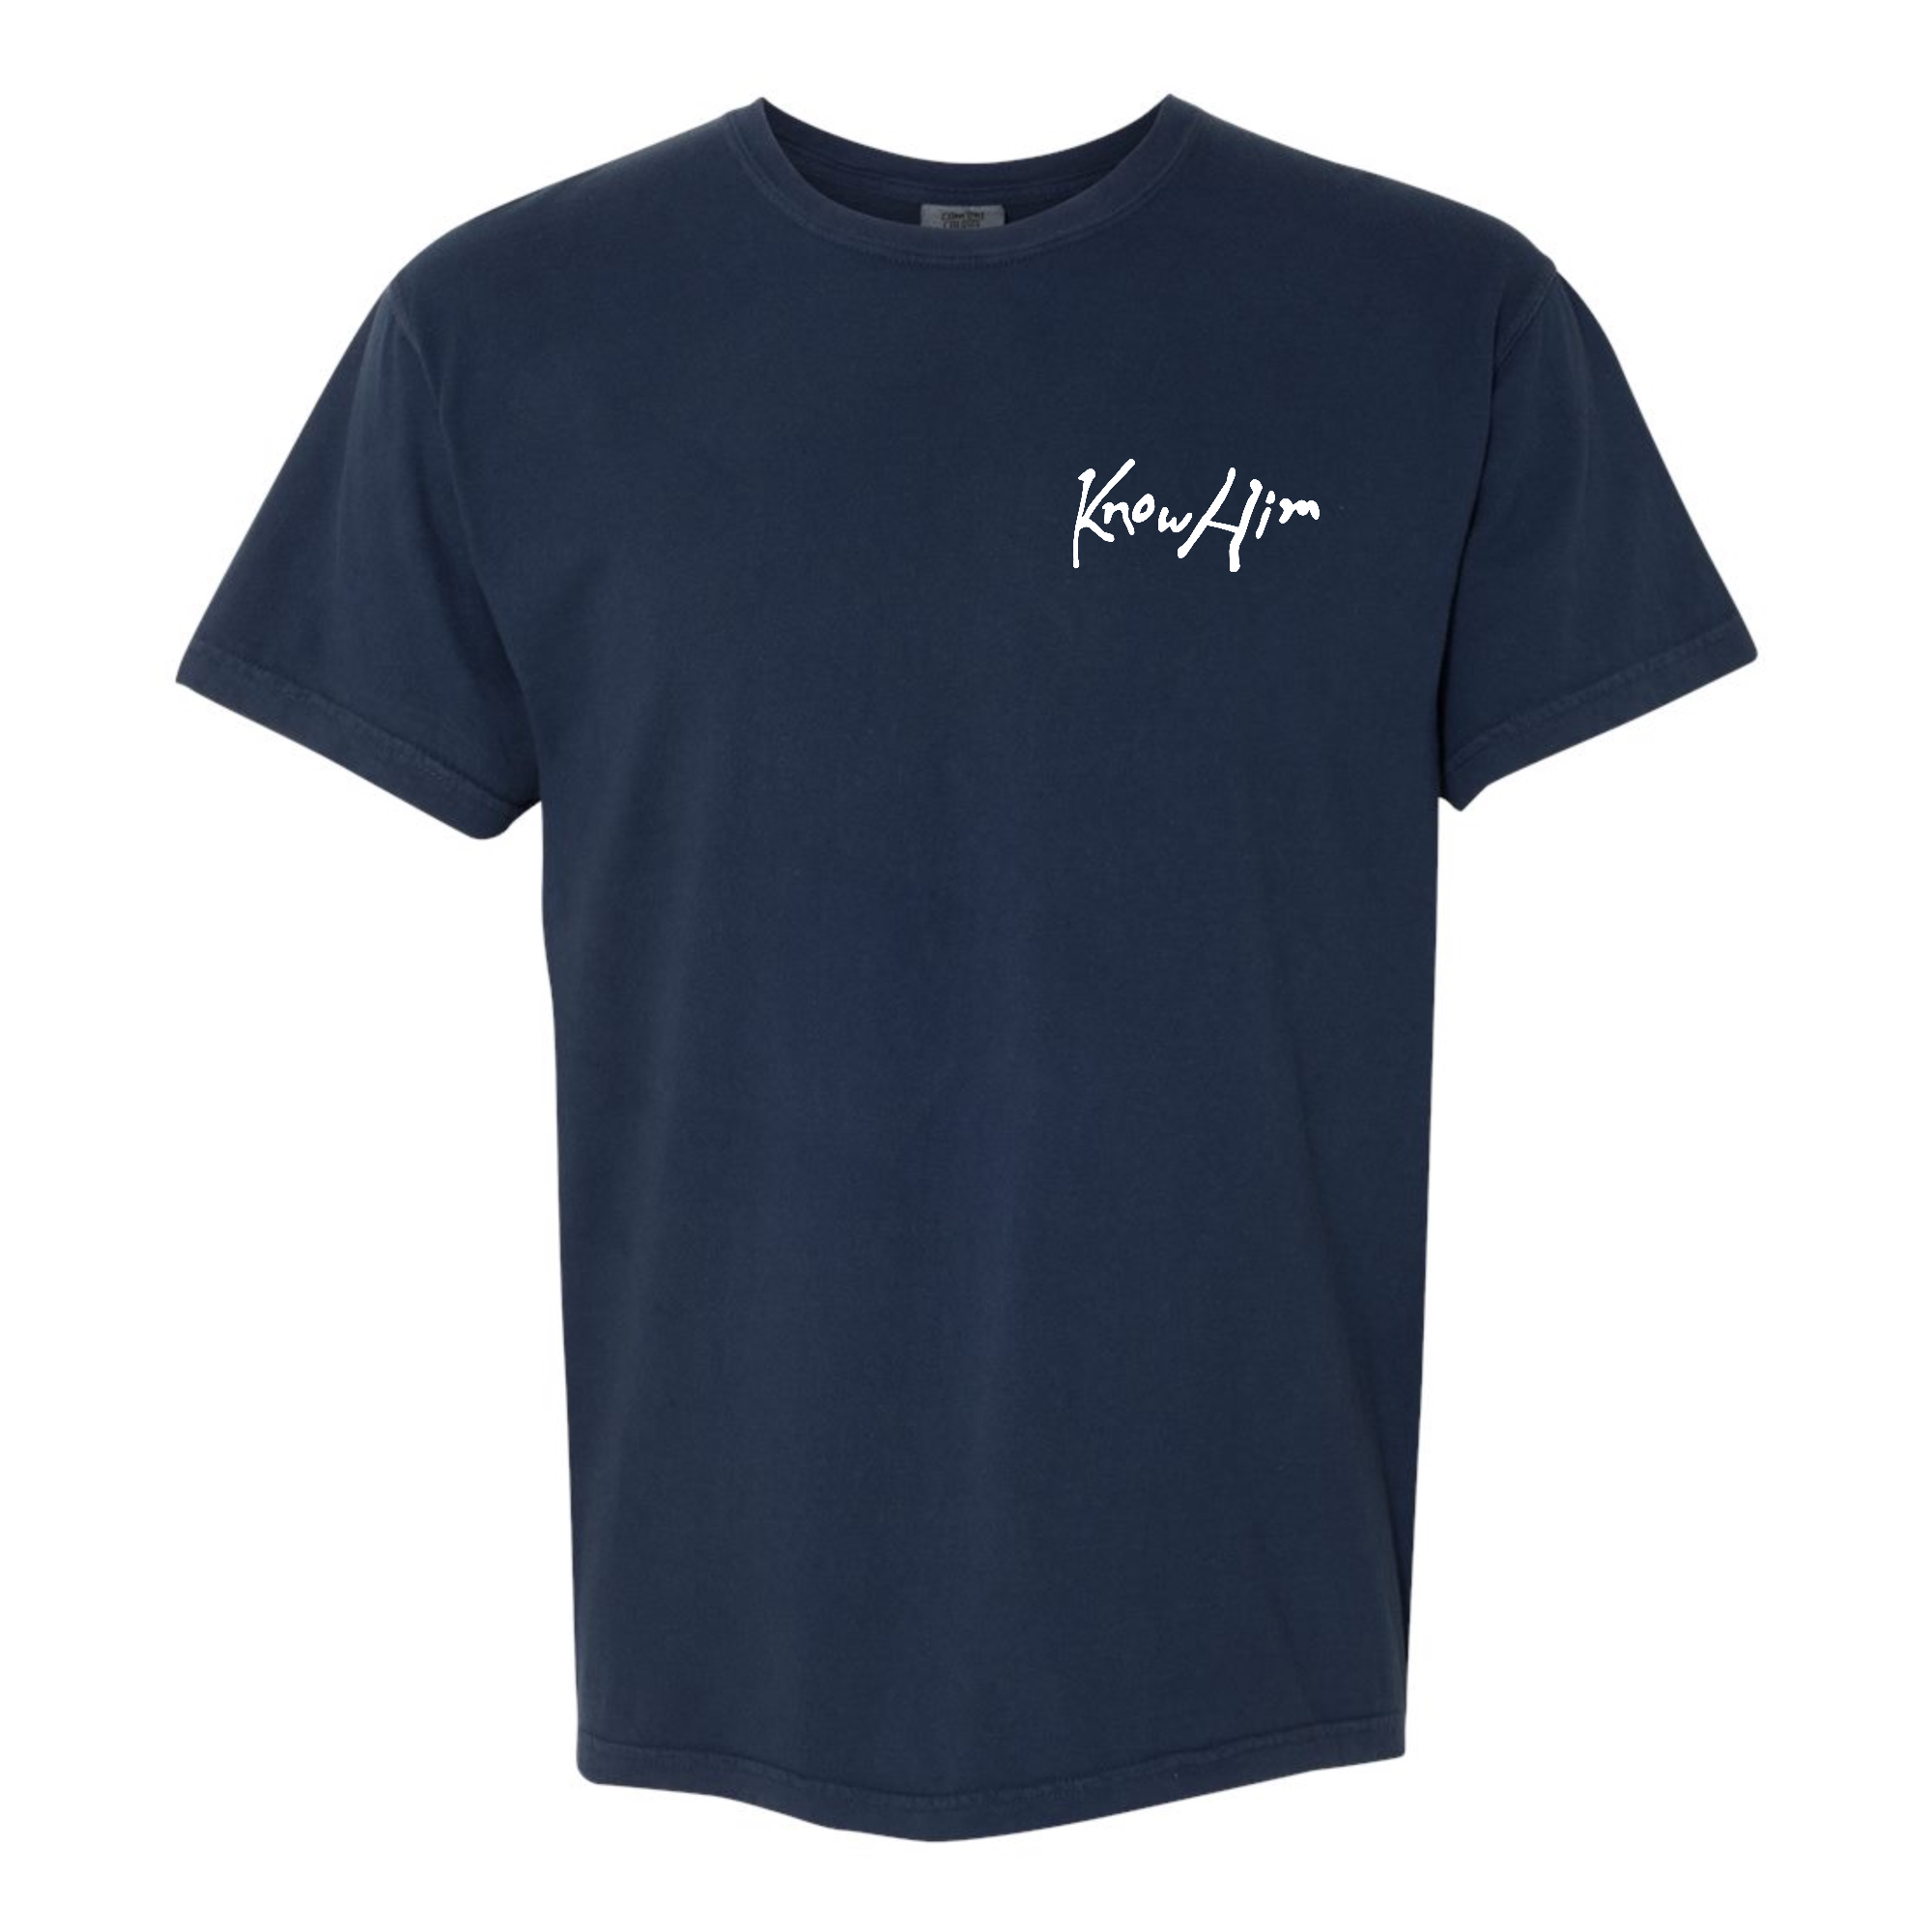 Heart and Soul (Midnight Blue) - Shirt